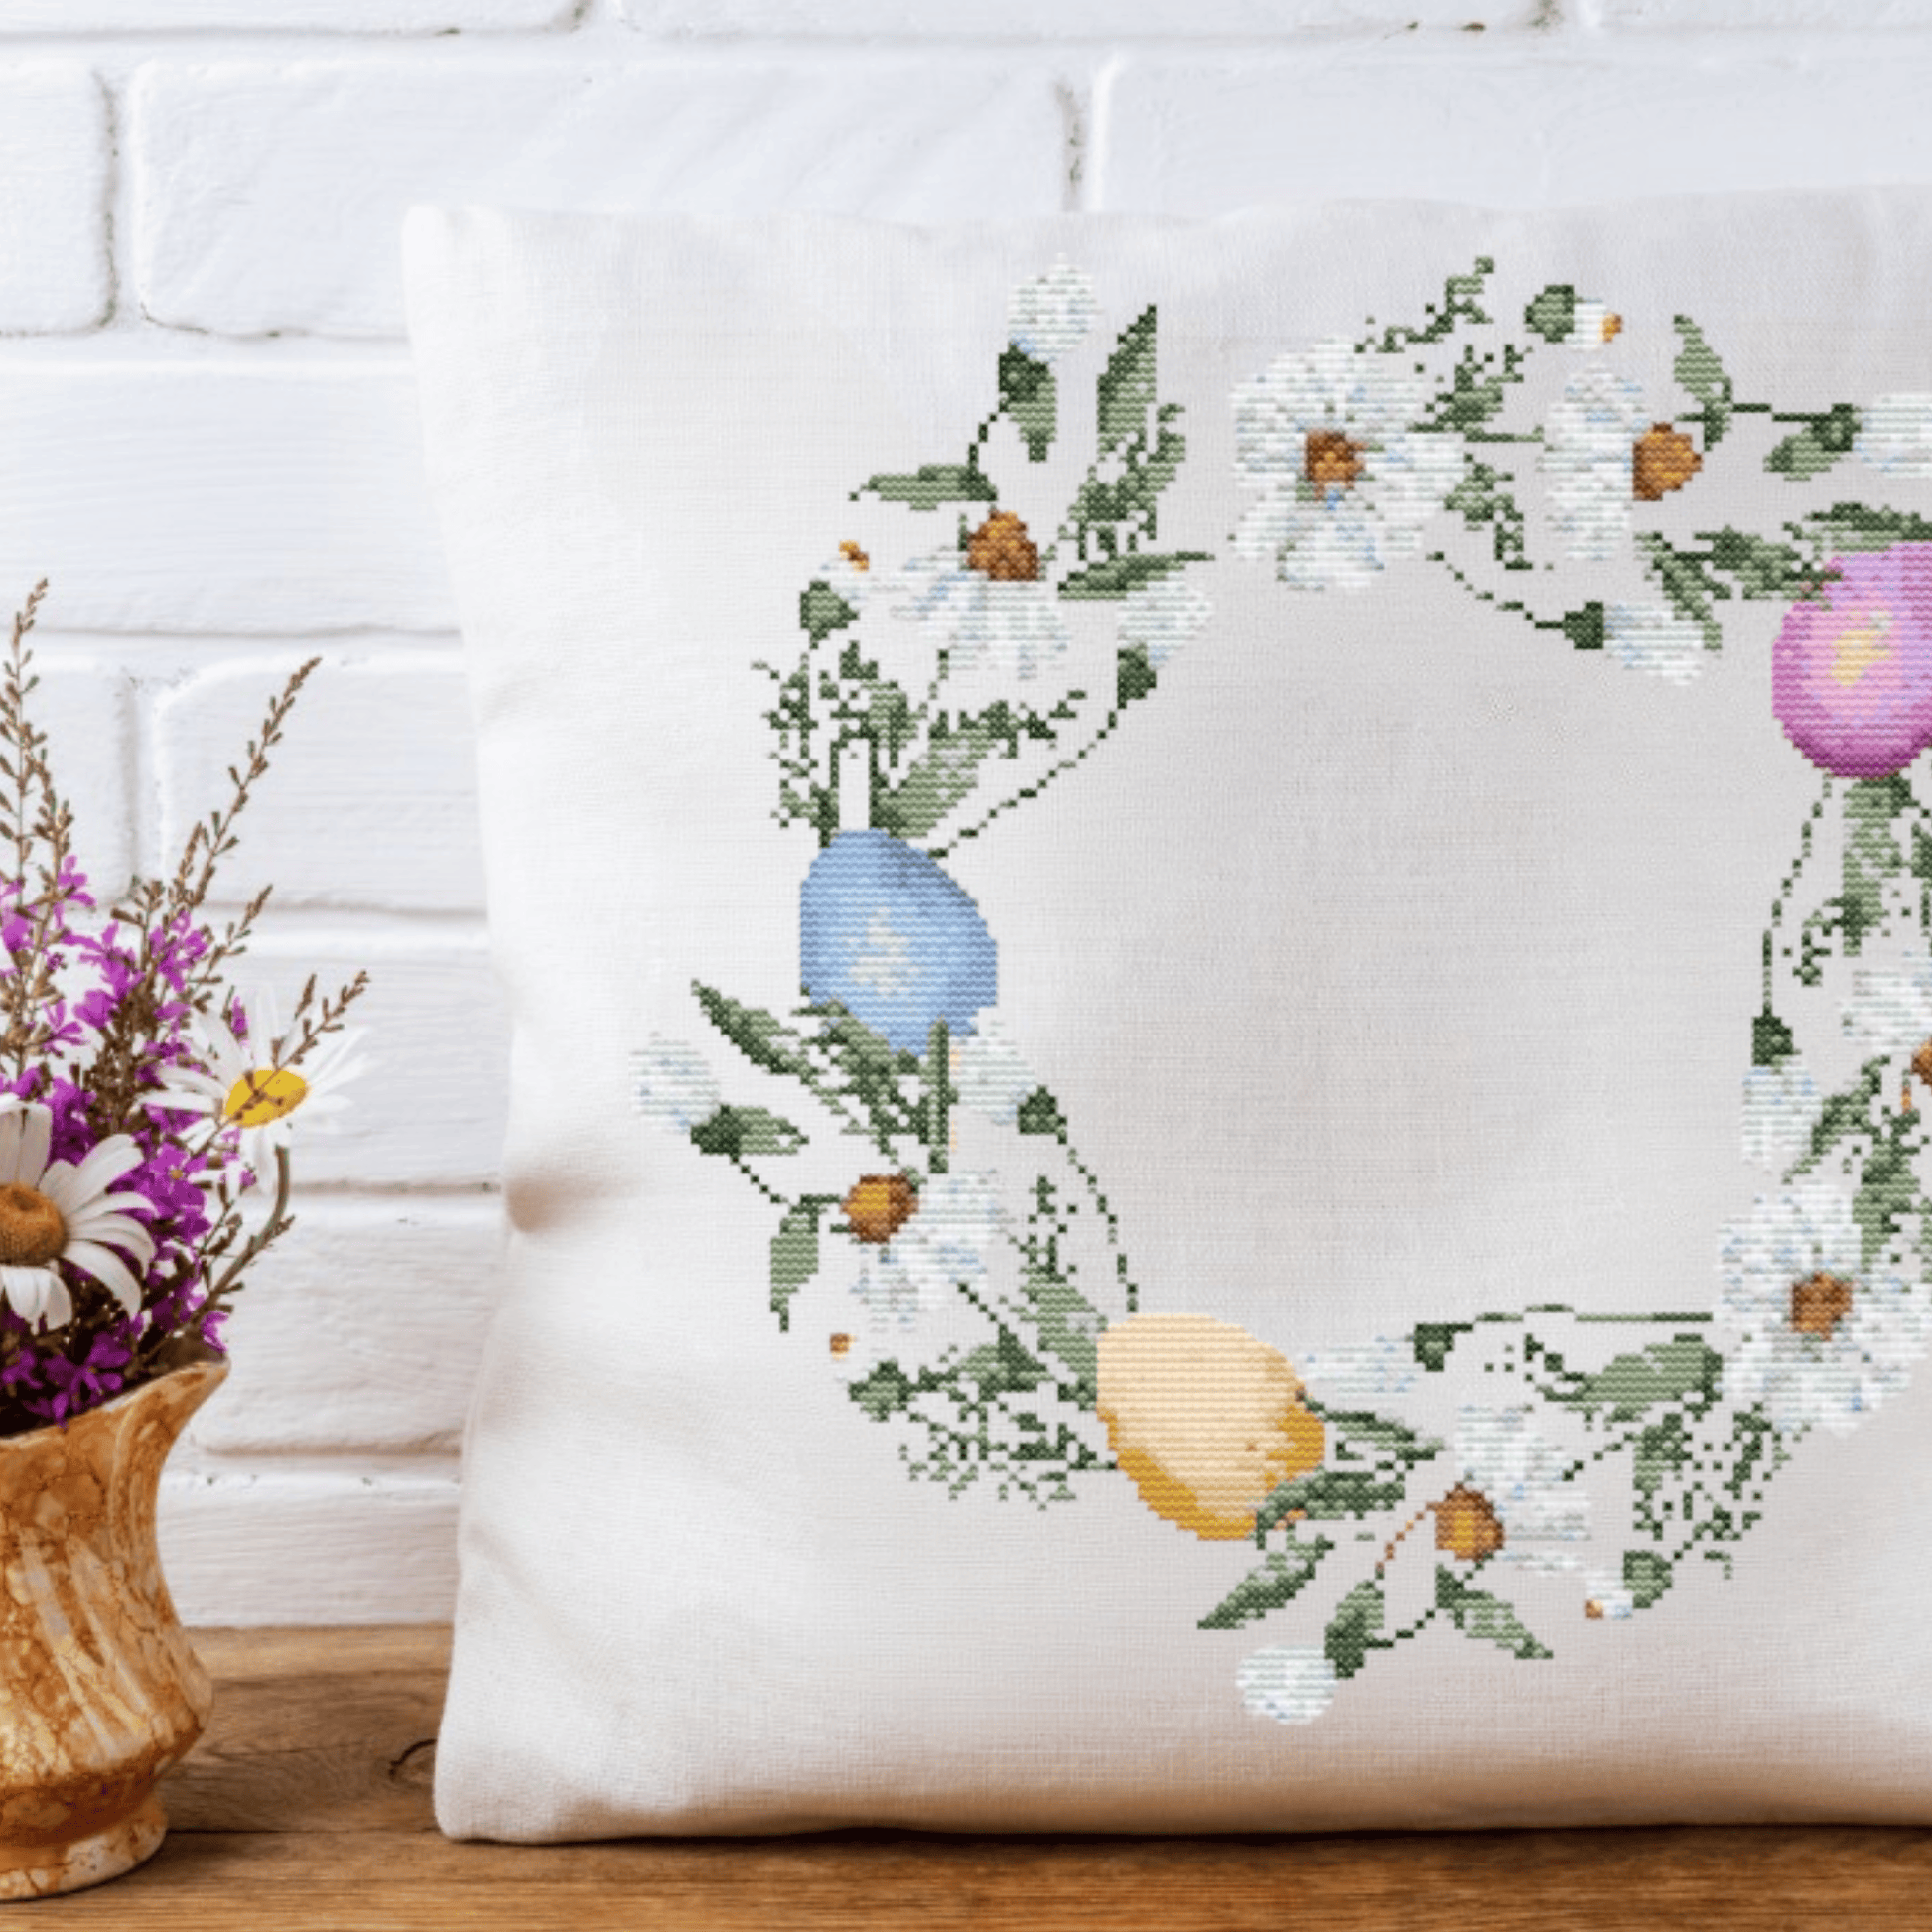 Easter wreath cross-stitch pattern with a wreath made of Easter eggs and daisies | Easter cross stitch charts | Modern and pretty cross stitch ideas